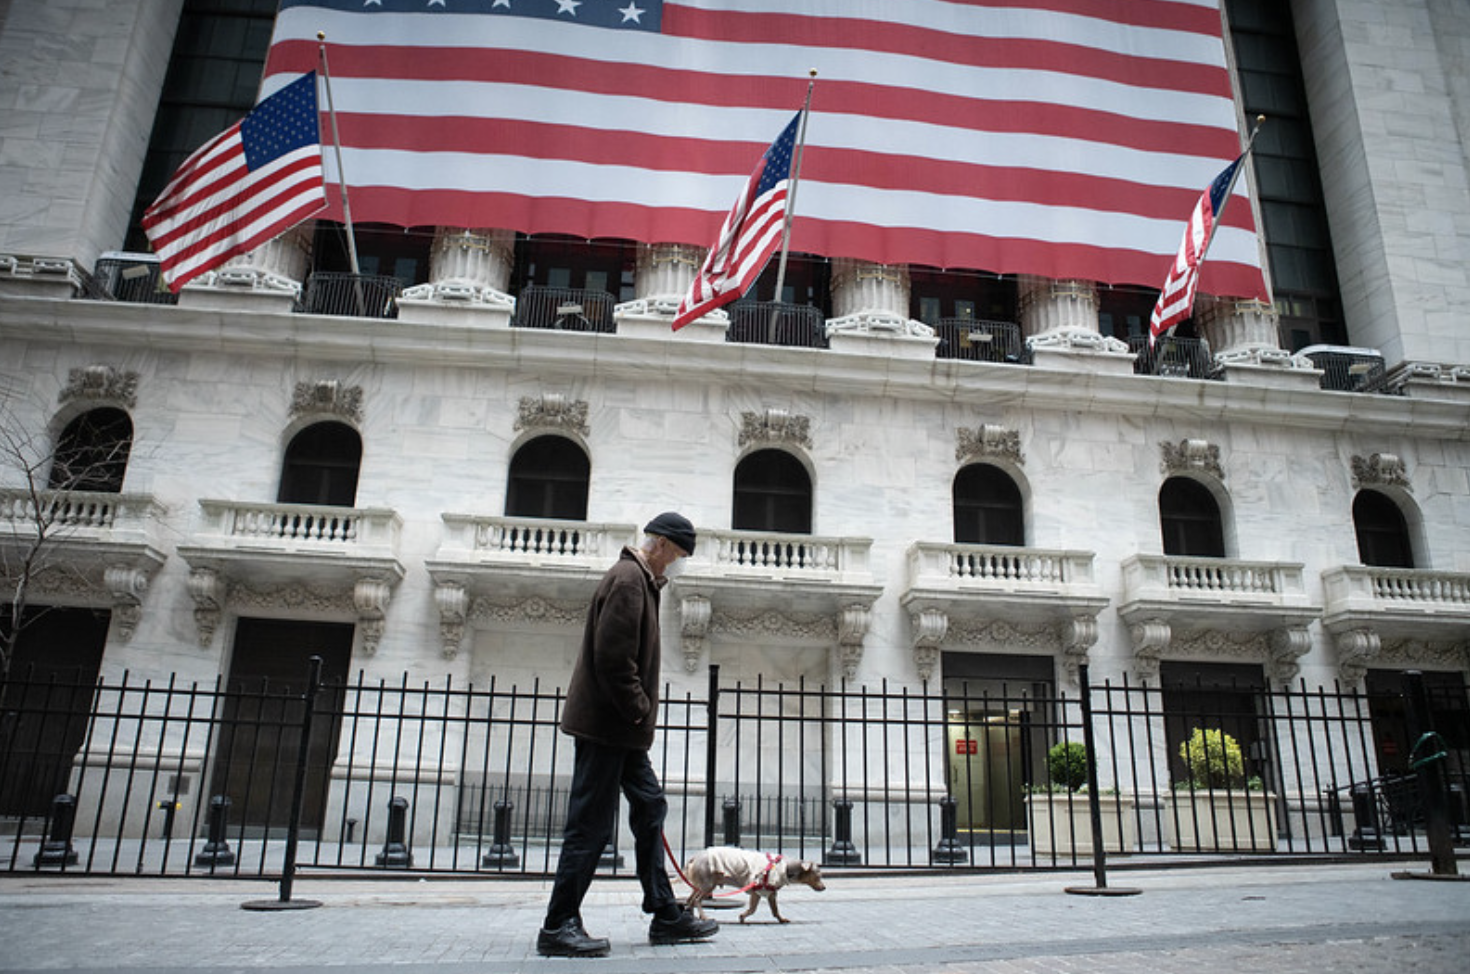 Man in a mask to prevent spread of the coronavirus walks his dog in front of the New York Stock Exchange, where the floor is closed to traders due to the virus. April 12, 2020 (Photo by Anthony Quintano) Creative Commons license via Flickr